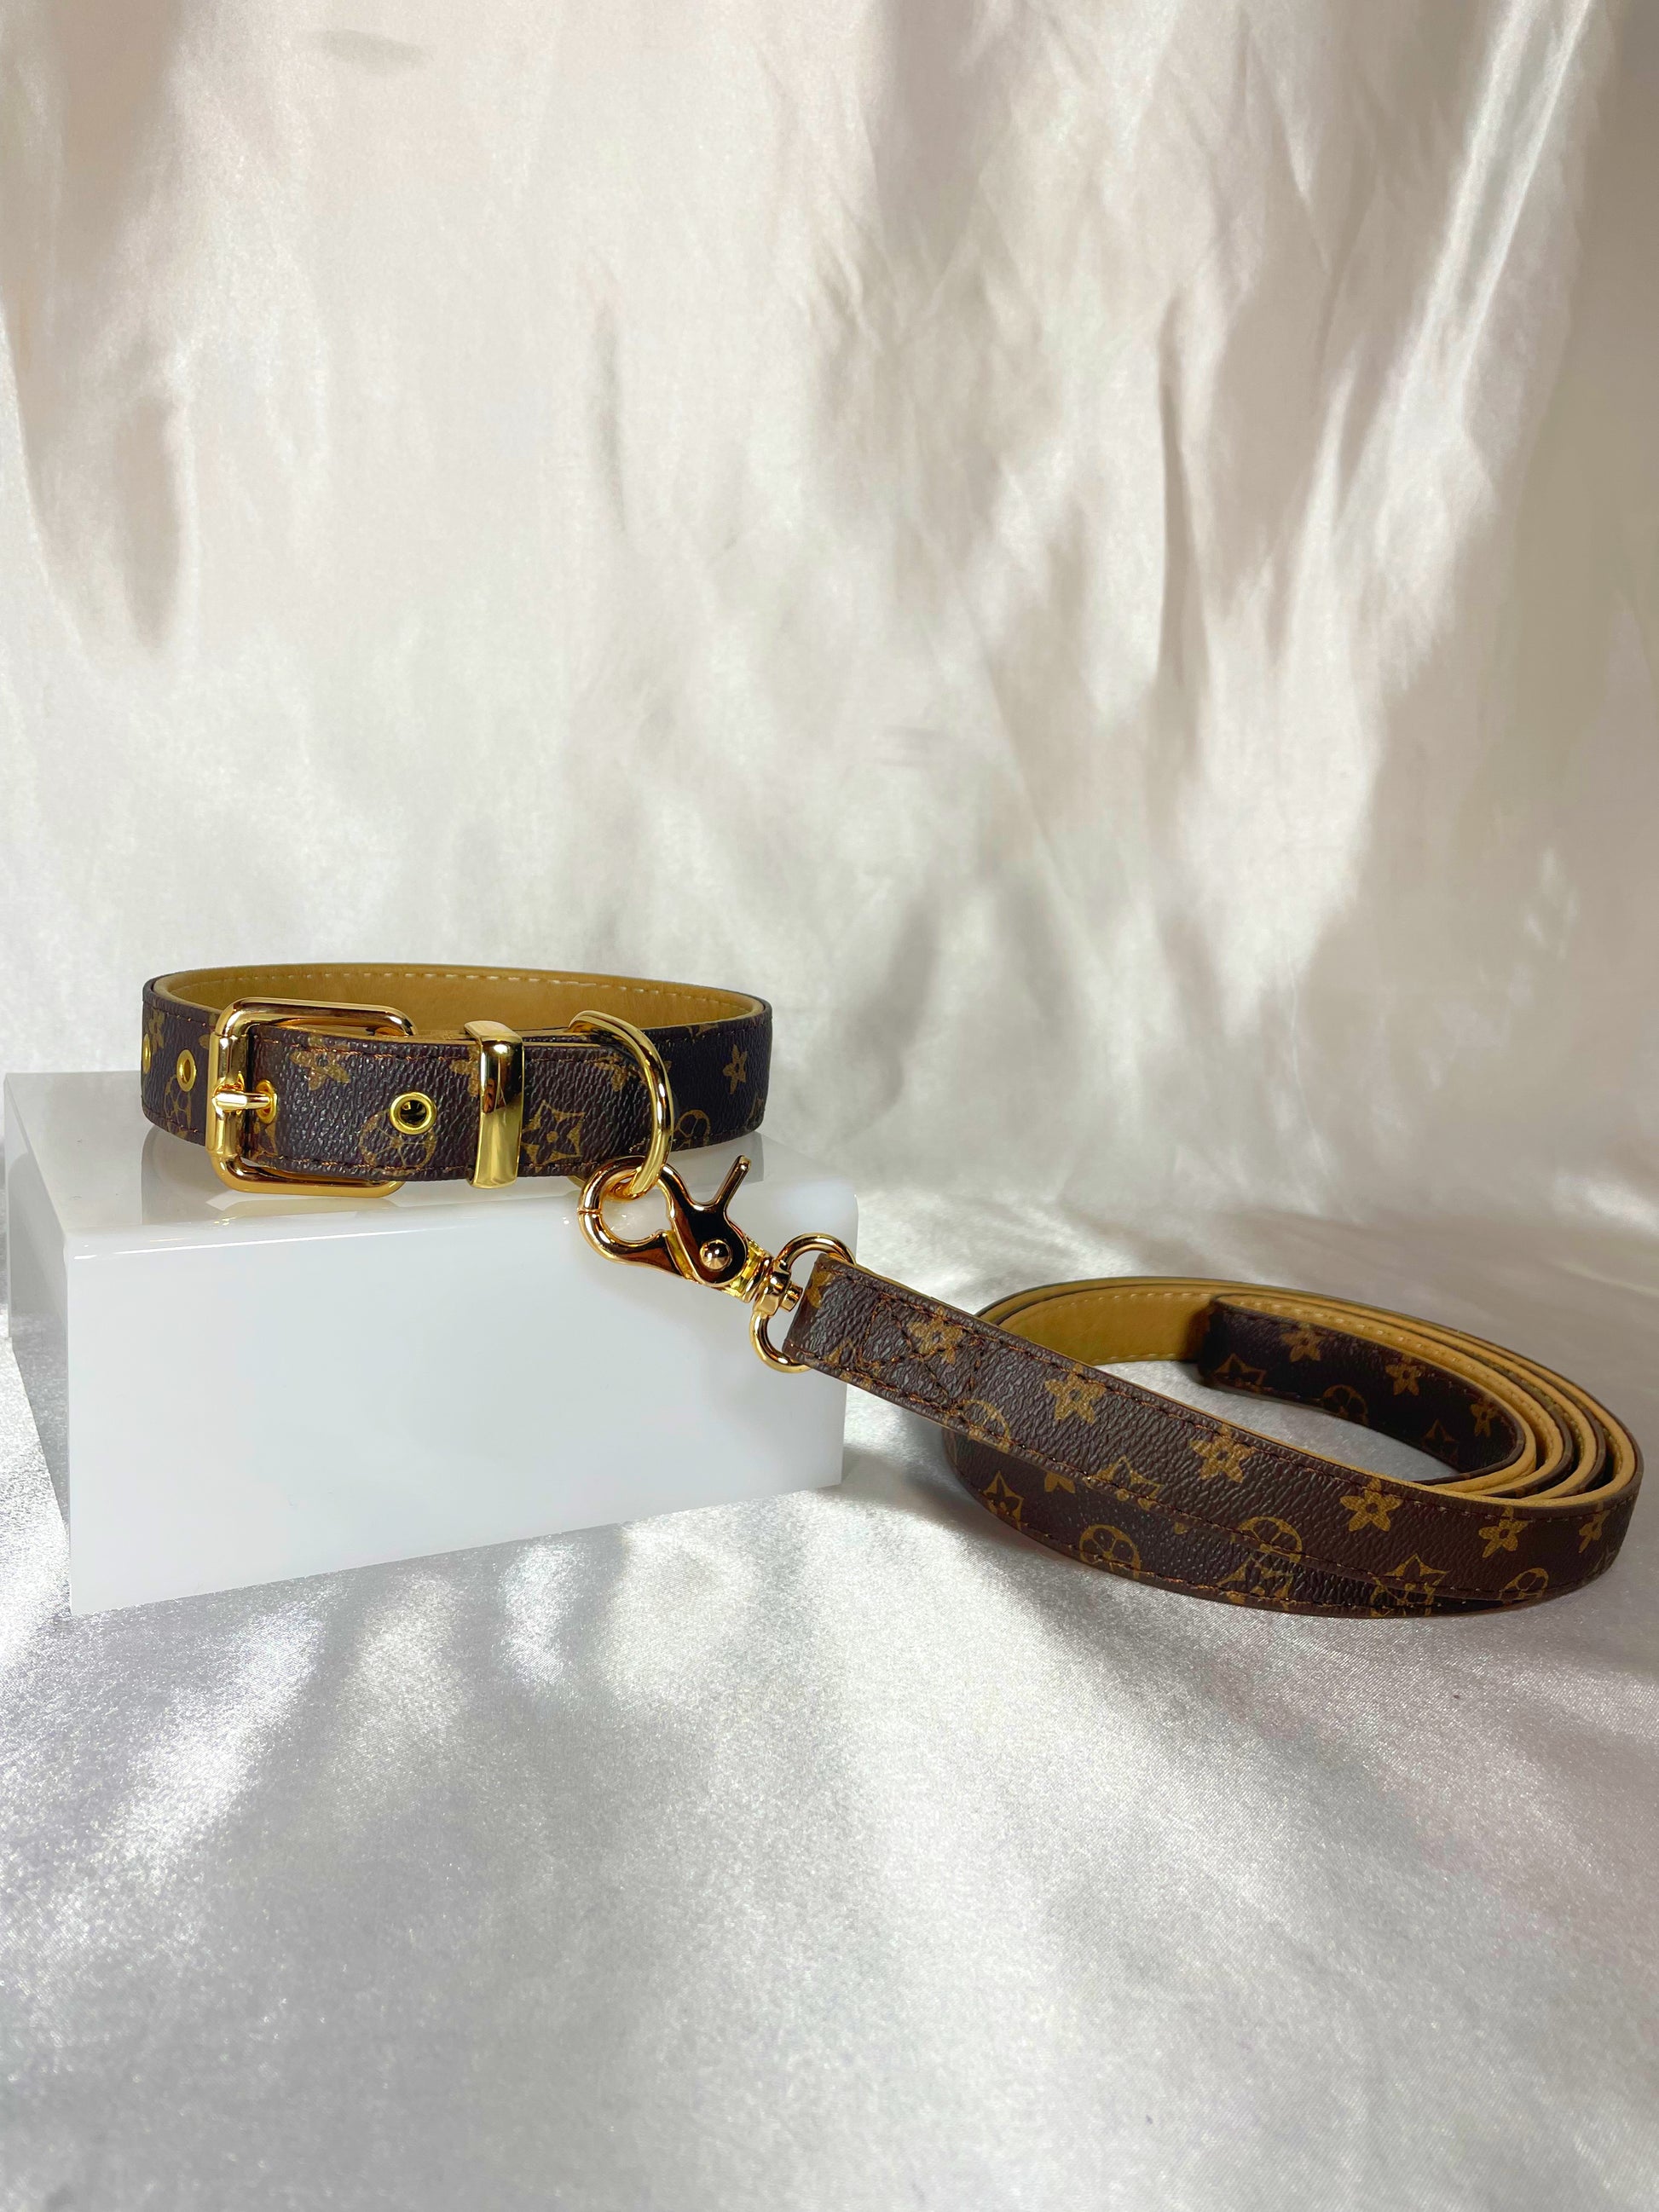 Brown Chewy V Pawtton Collar for Dogs and Cats